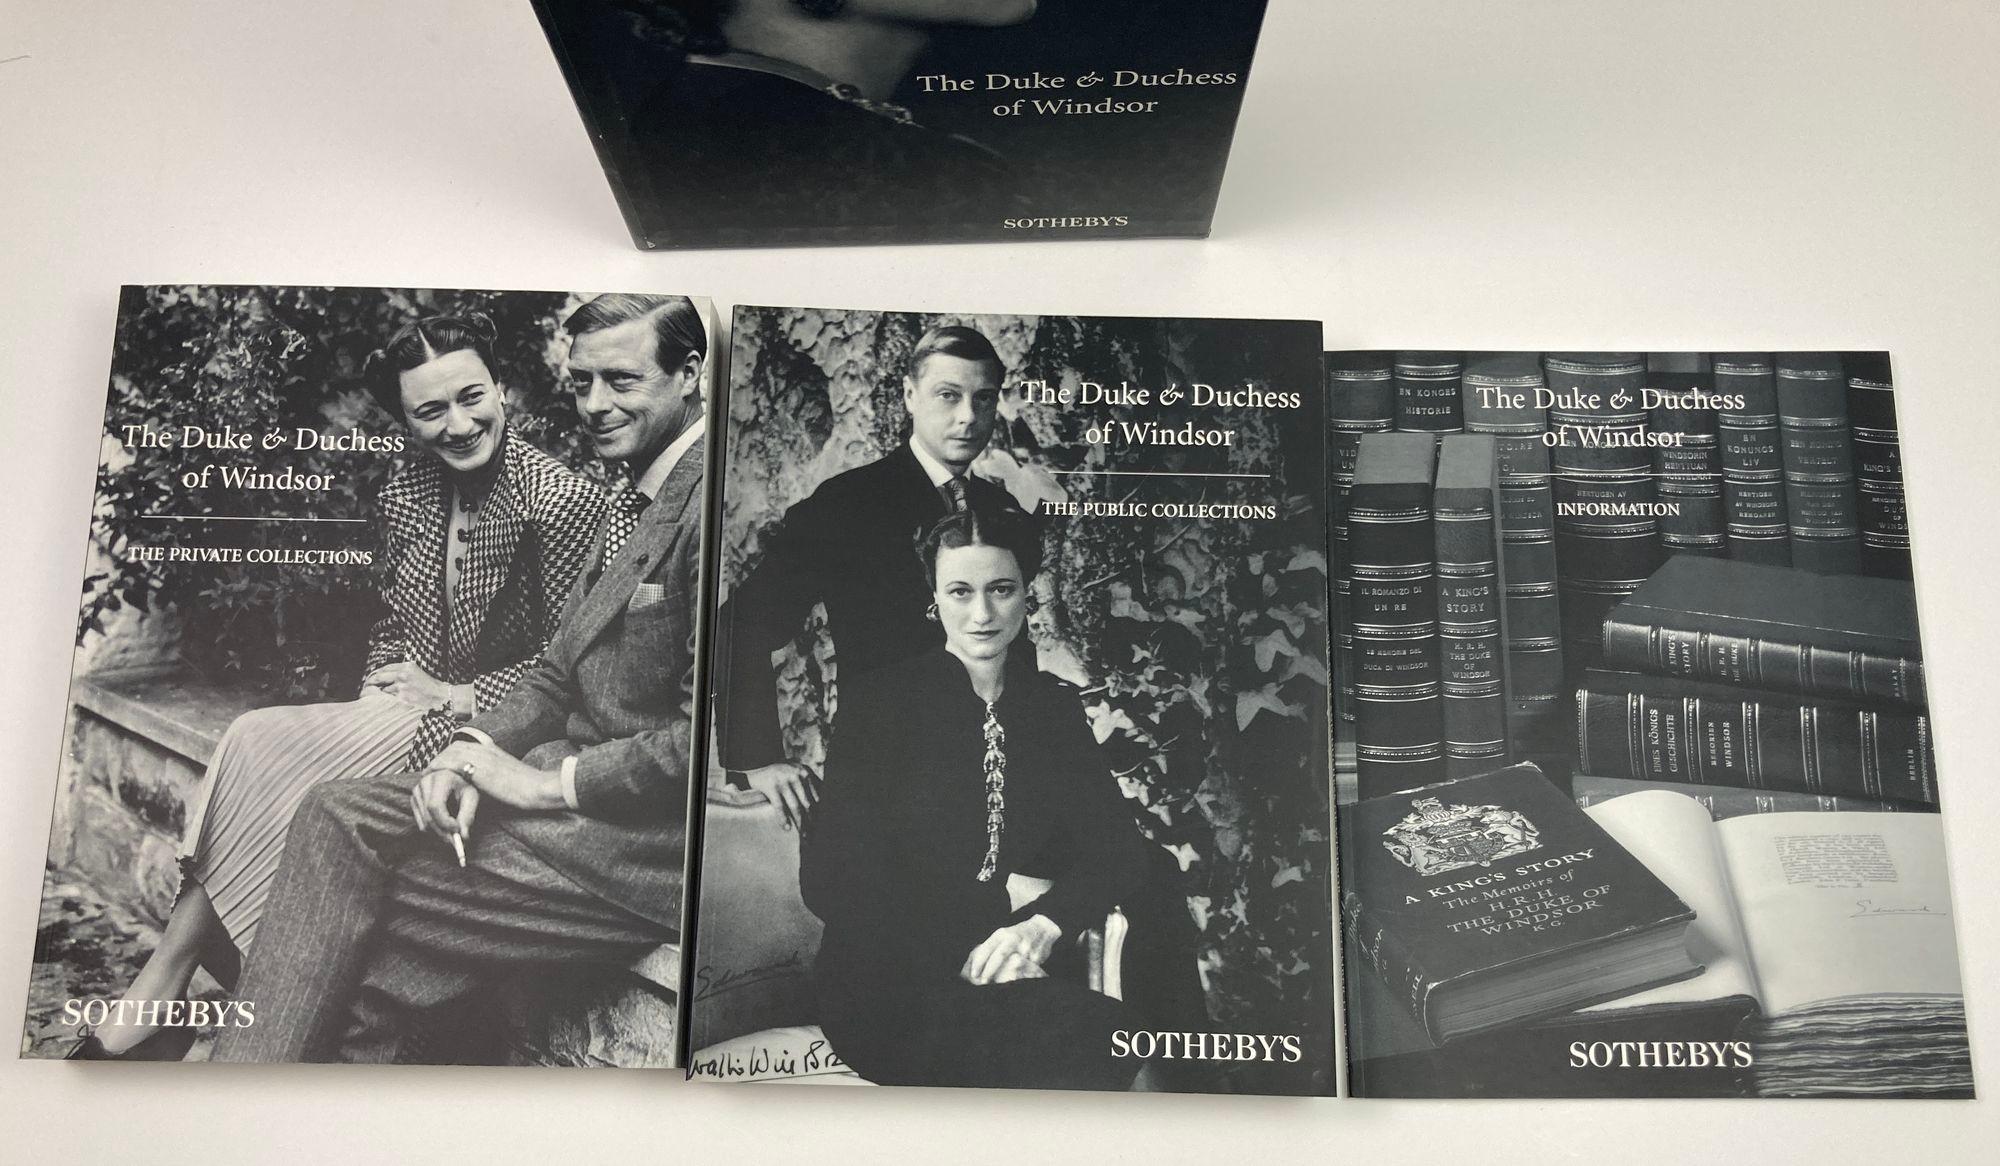 American The Duke and Duchess of Windsor Auction Sothebys Books Catalogs in Slipcase Box For Sale